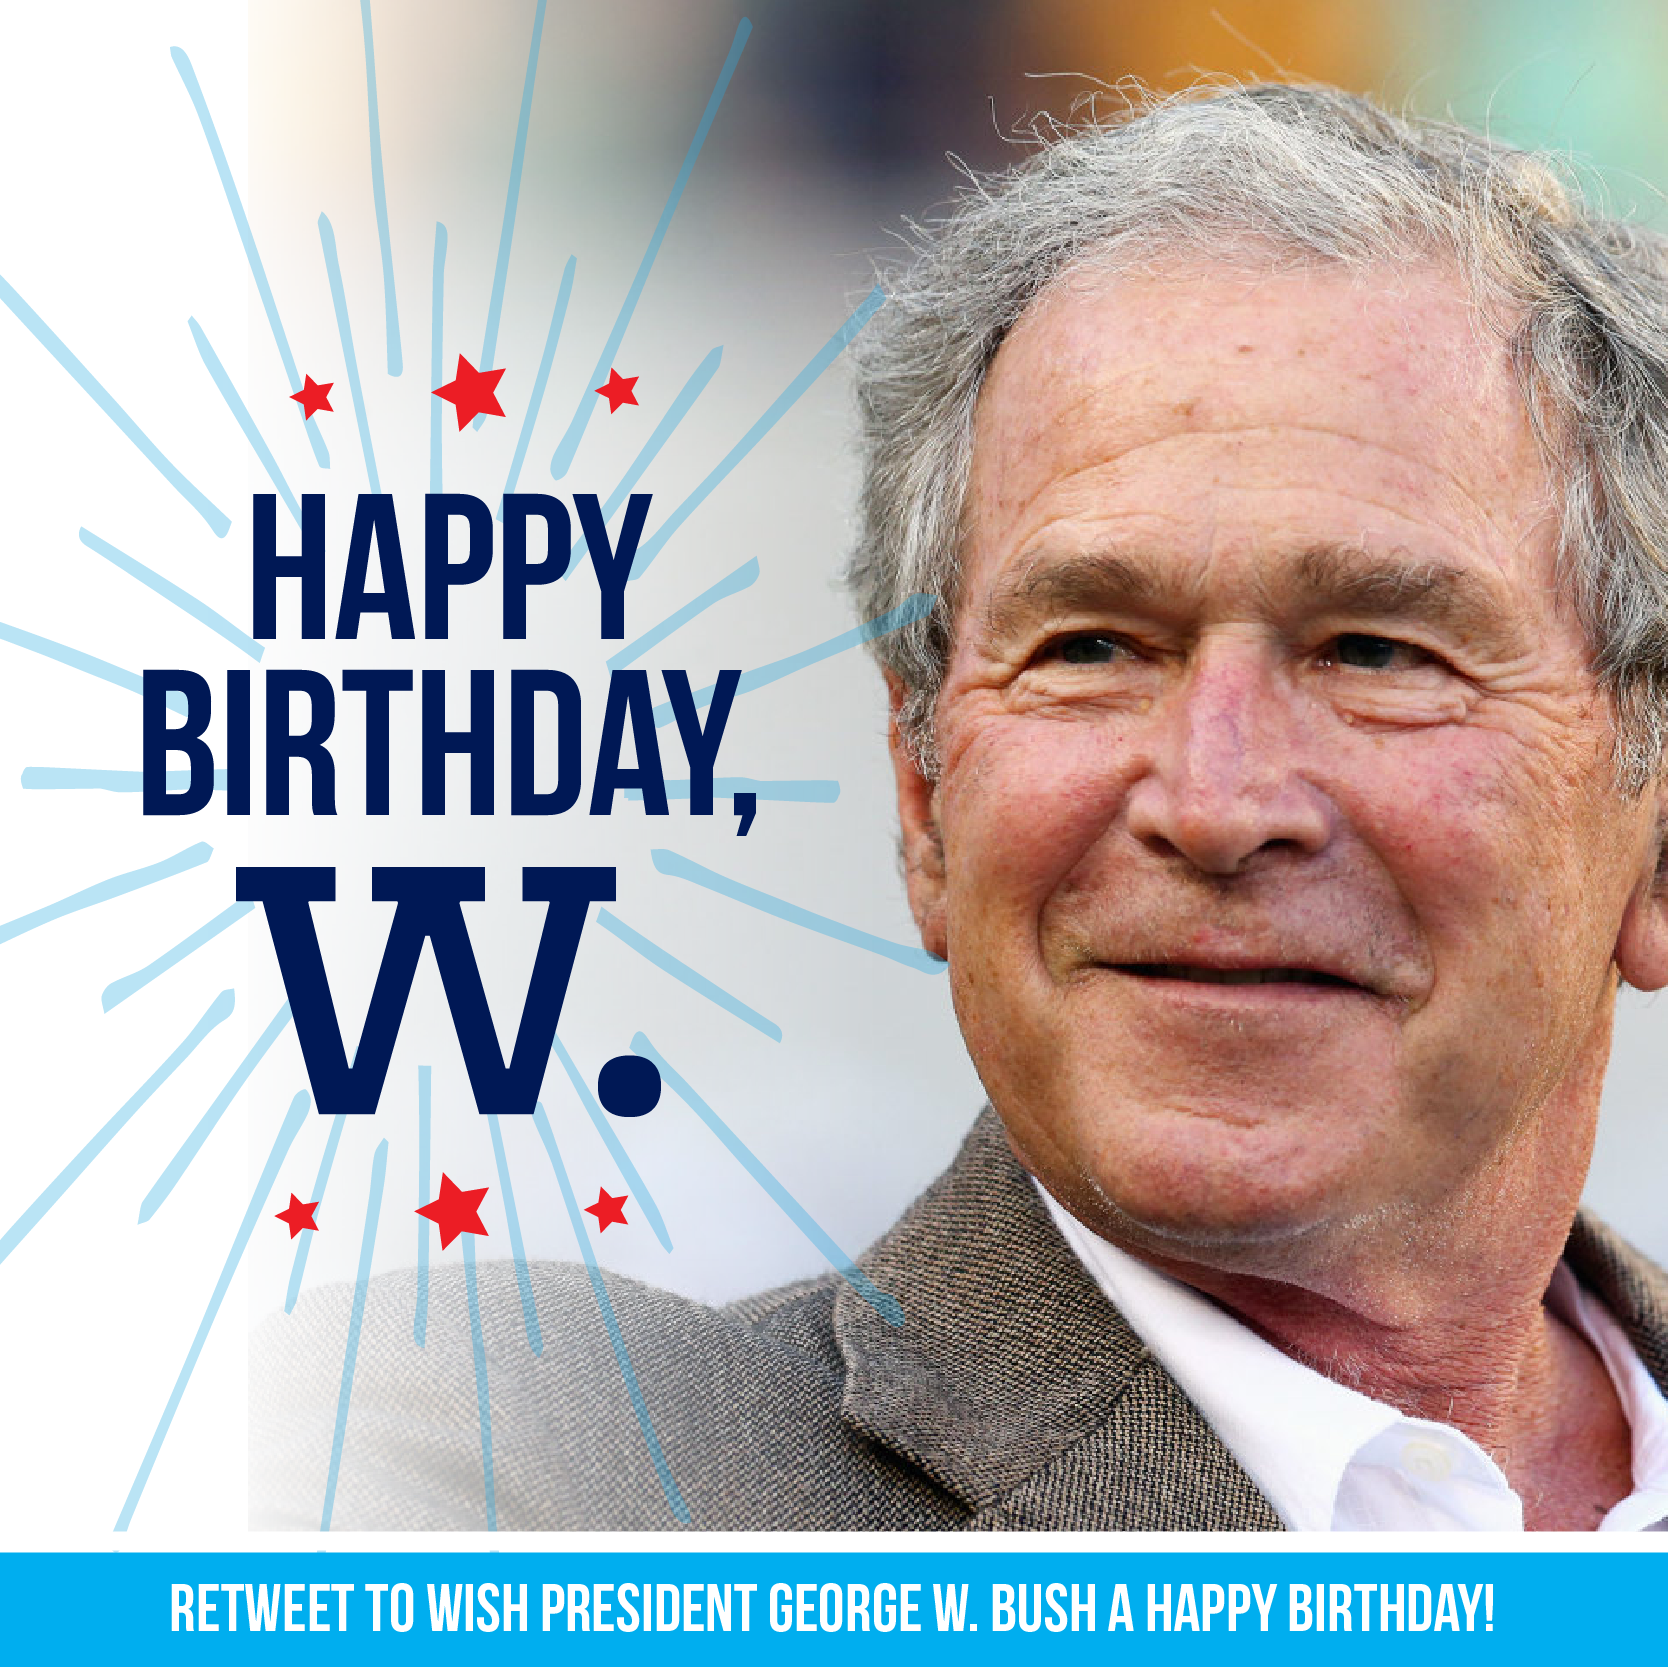 Join us in wishing President George W. Bush a very happy birthday! Thank you for your service and leadership! 